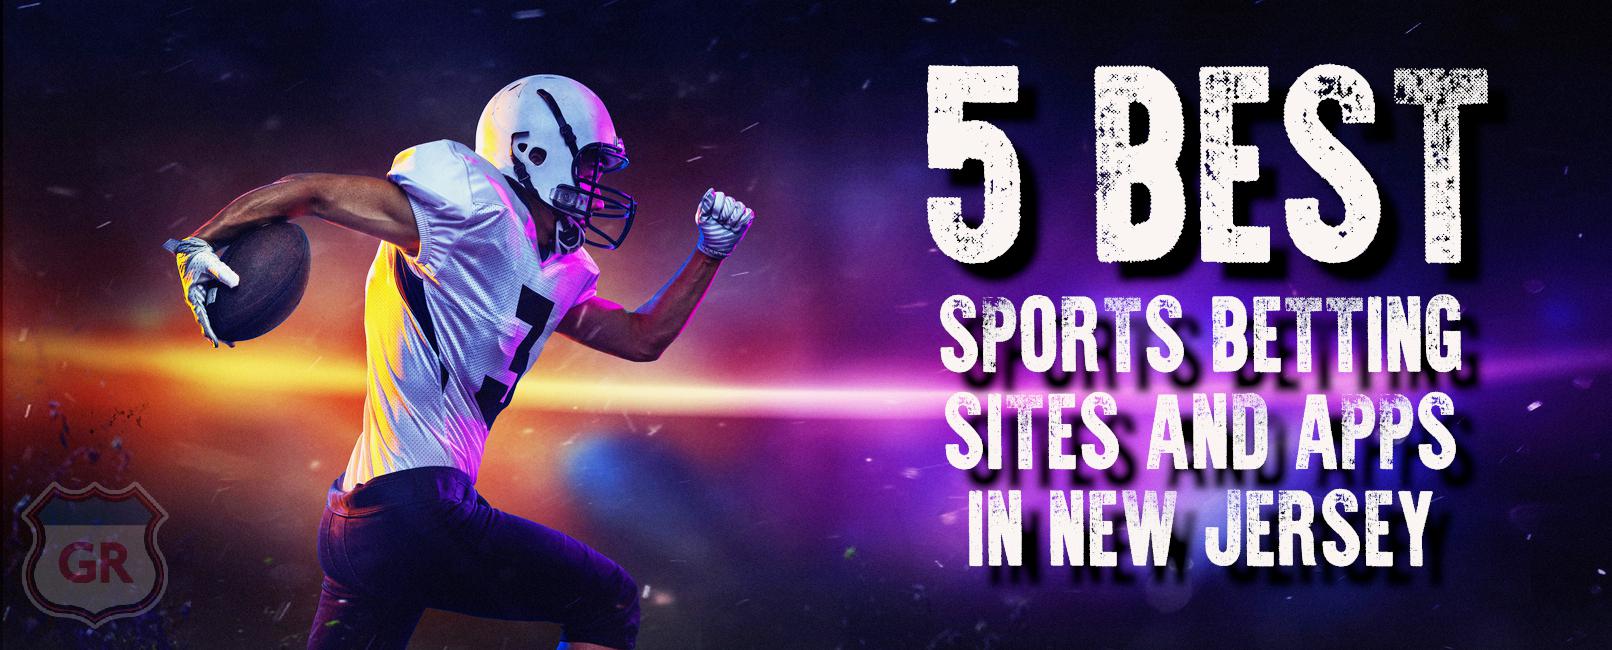 A football player running against a dark background. on the right side is text that reads "top 5 sports betting sites & apps in new jersey"